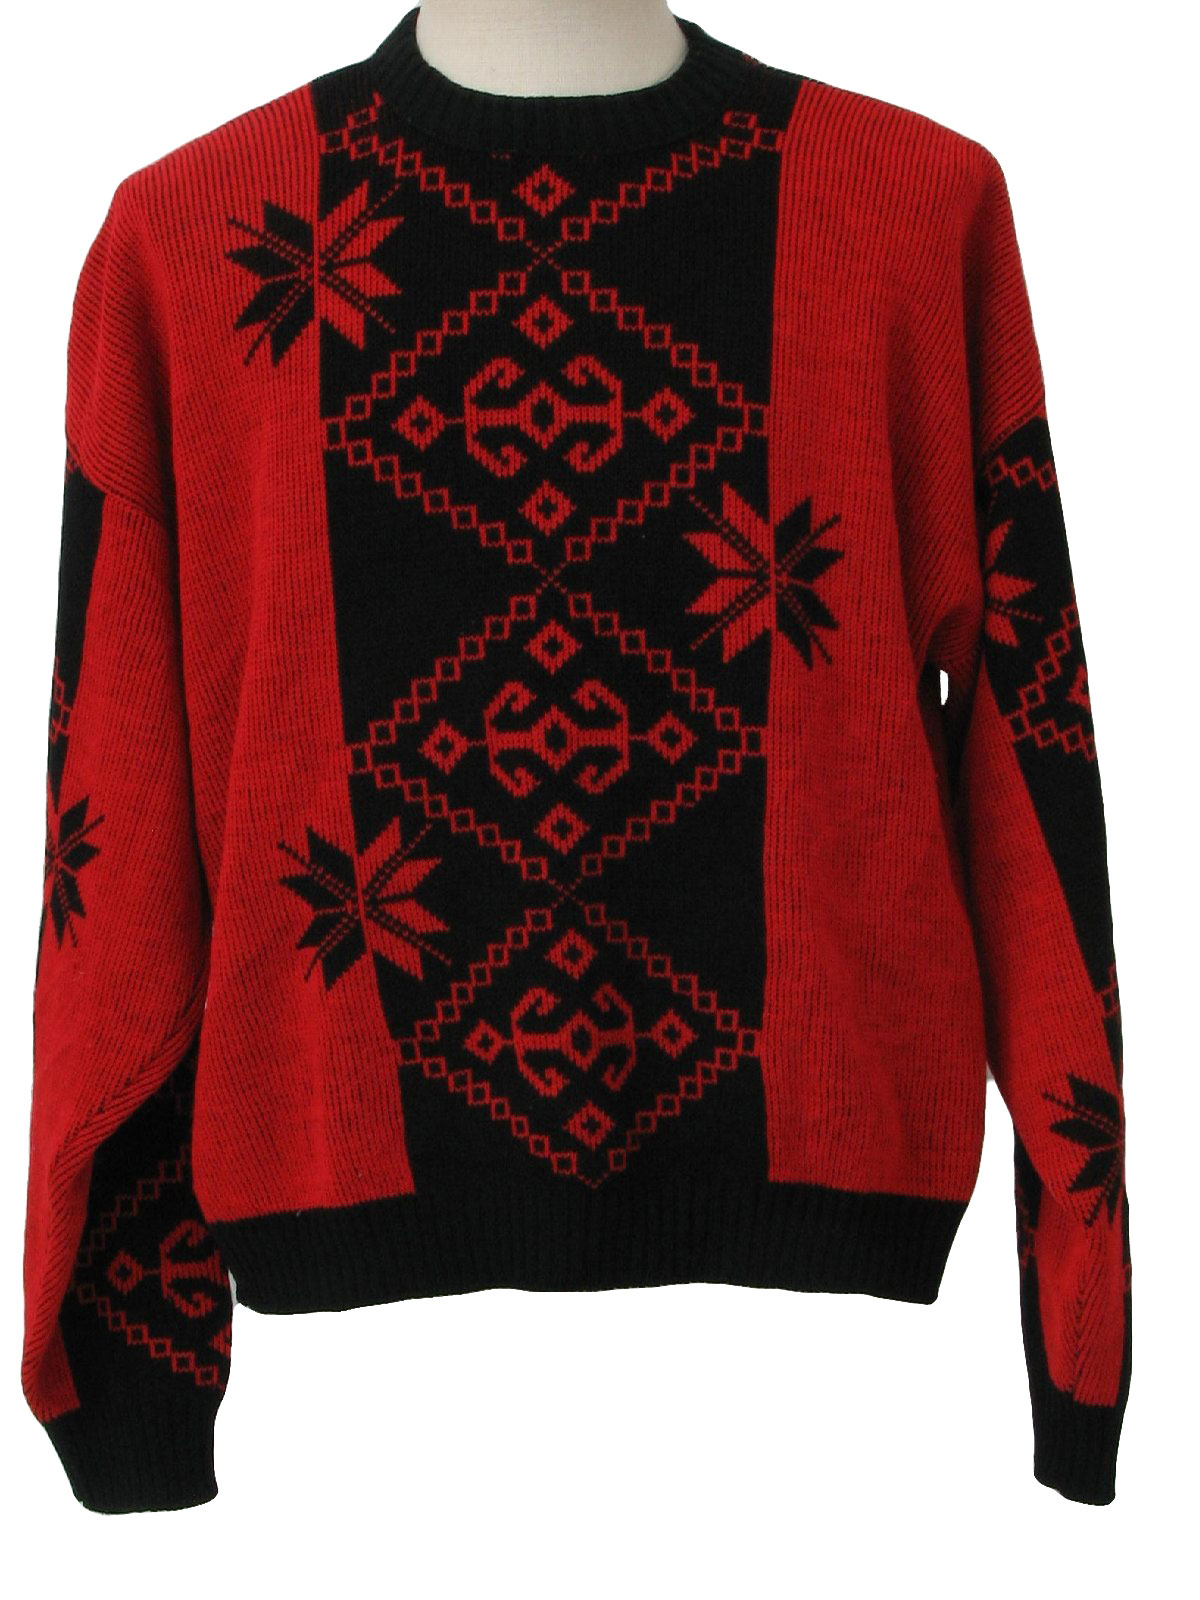 Le Tigre 1980s Vintage Sweater: 80s -Le Tigre- Mens red and black, long ...